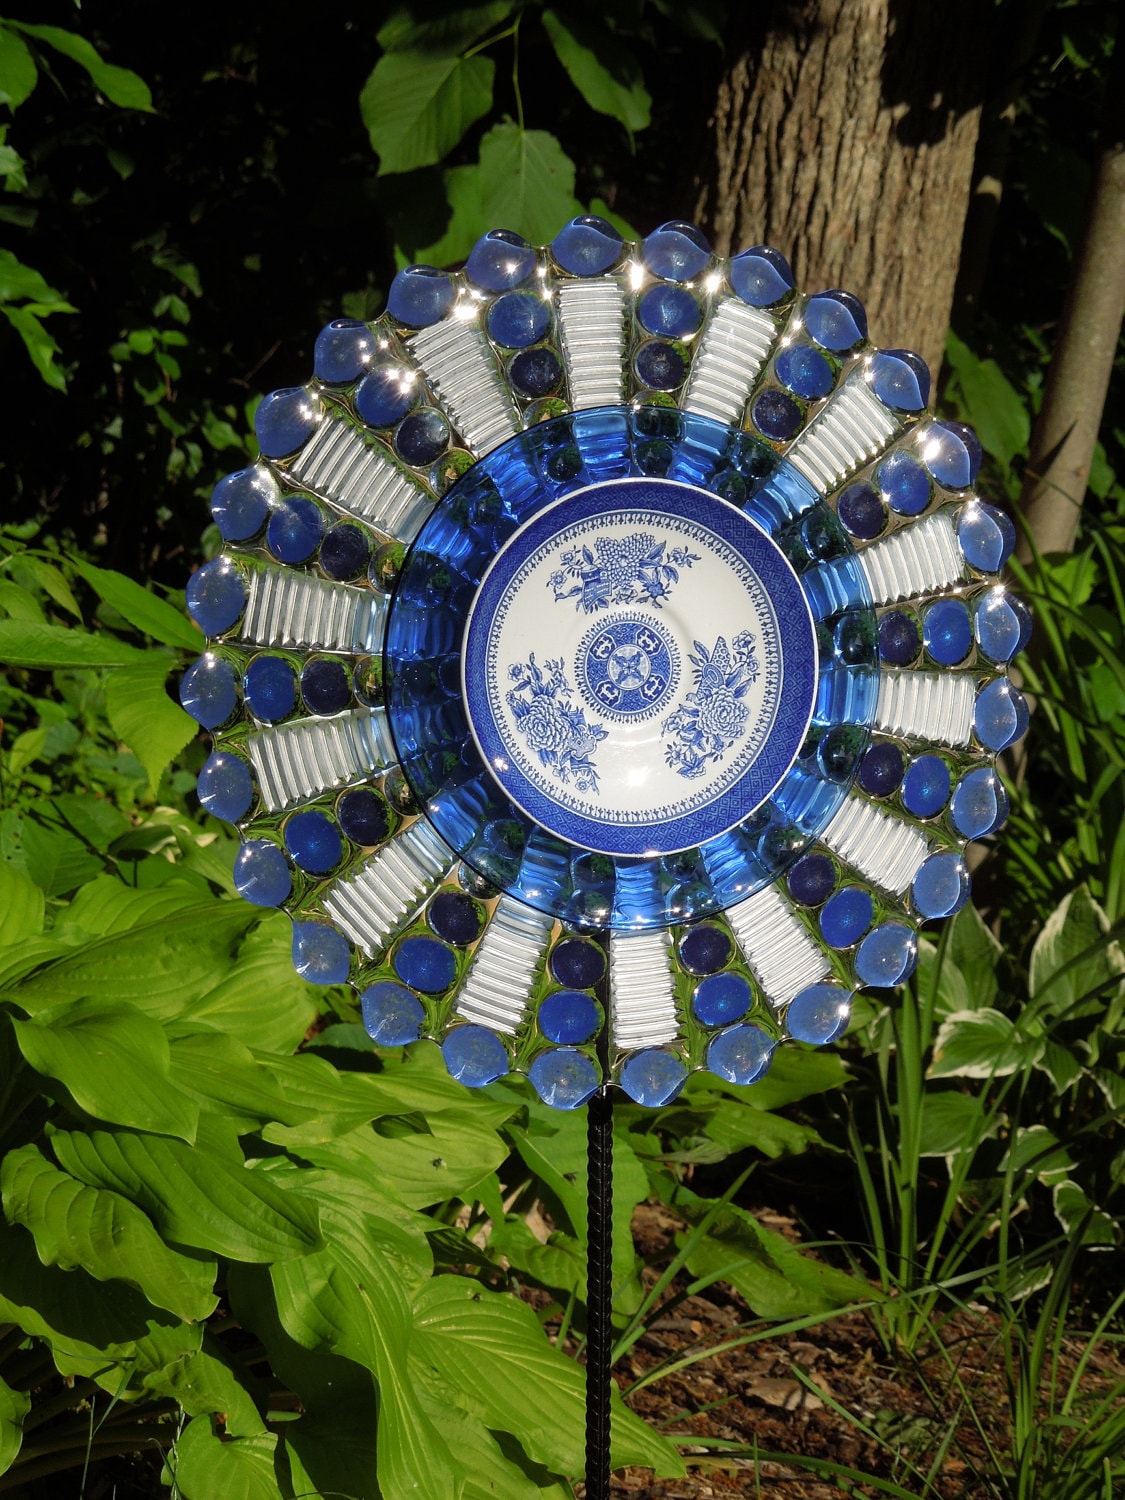 Outdoor GARDEN decor and YARD sun catcher made with recycled glassware